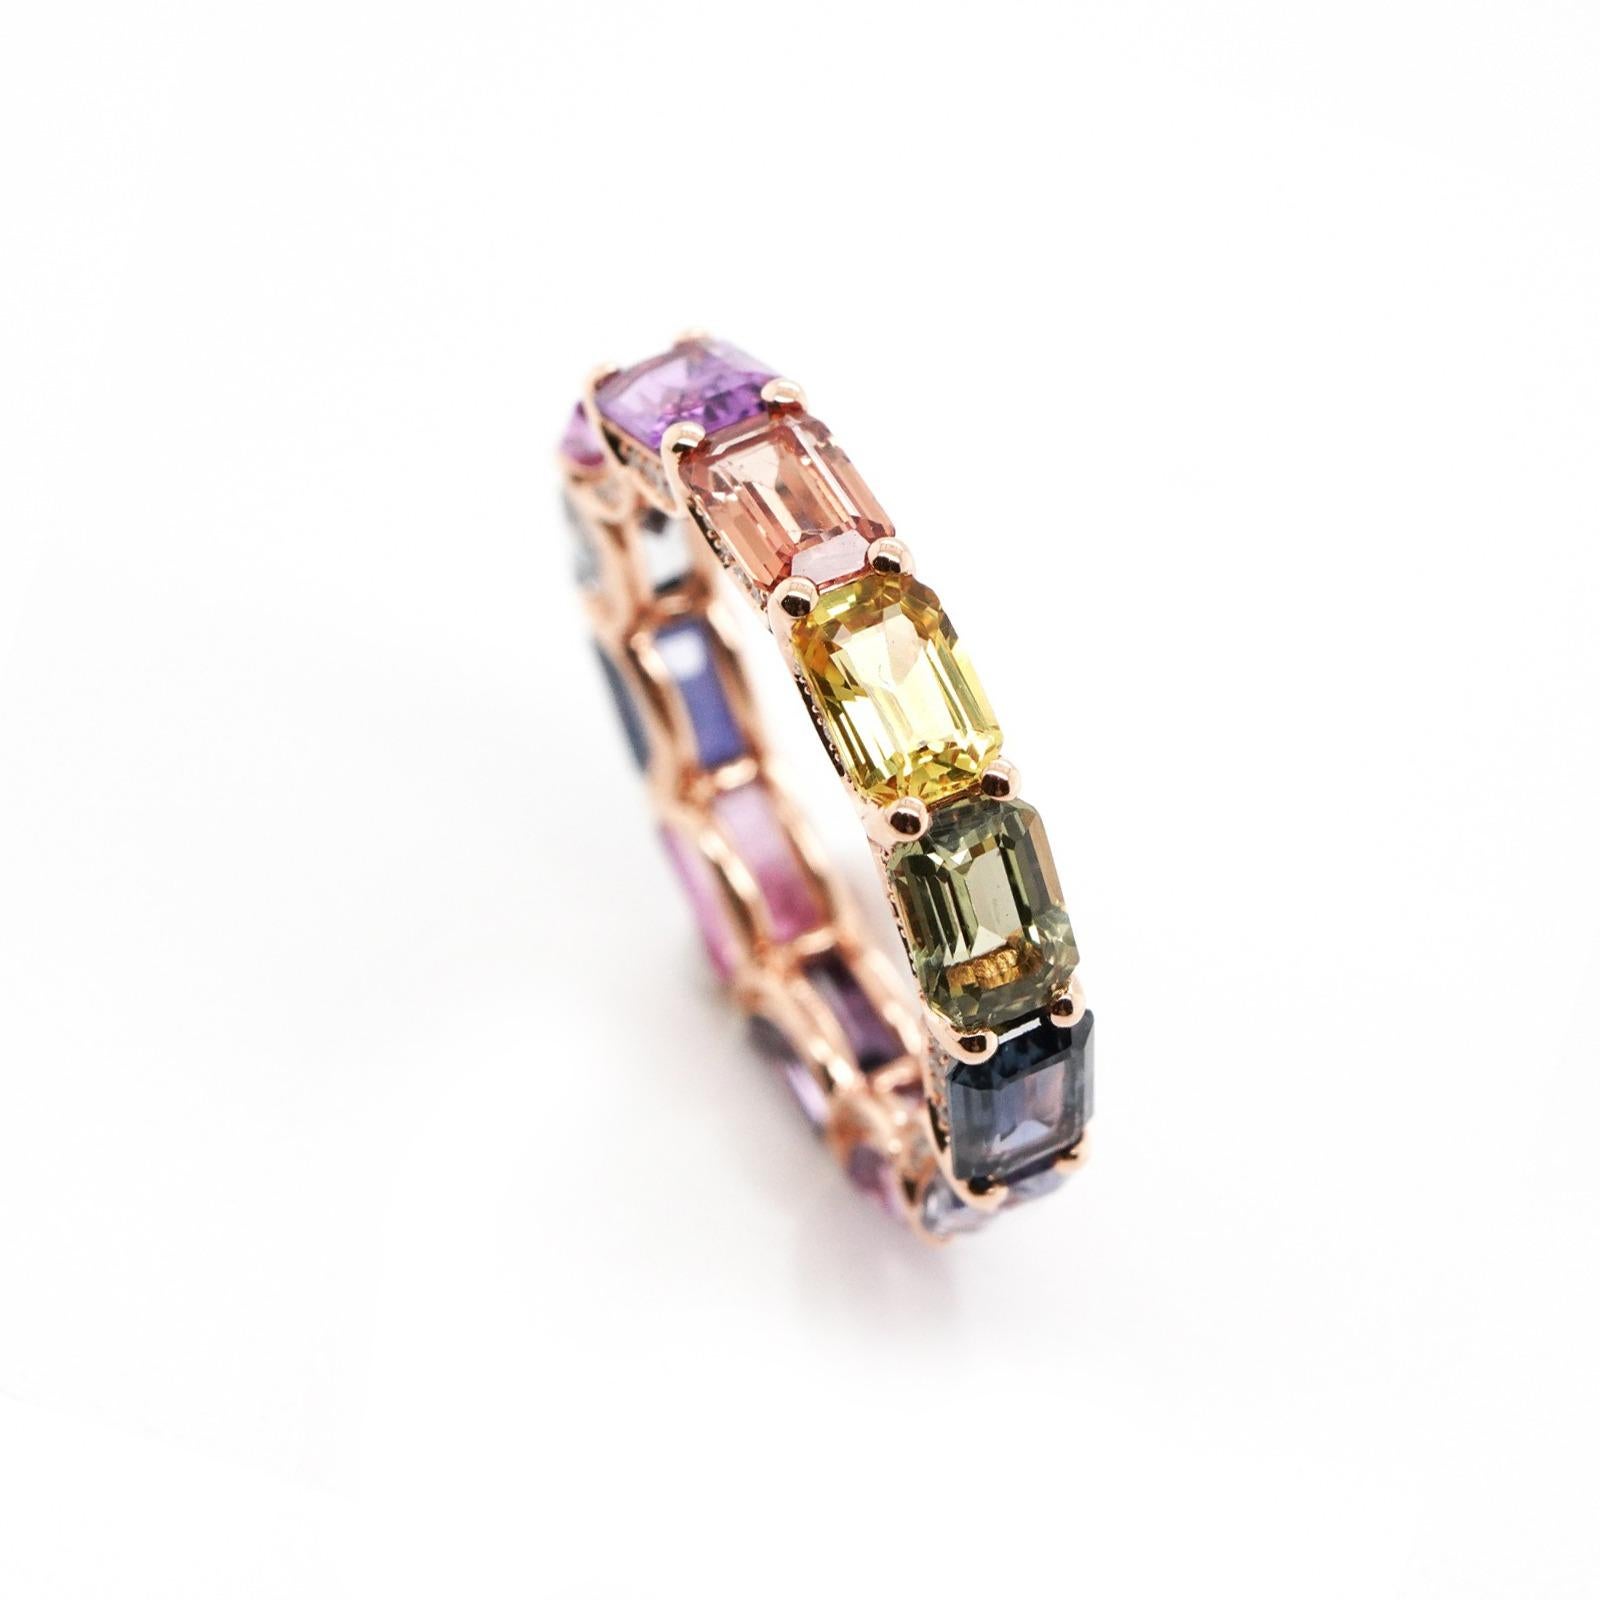 18K rose gold with natural fancy sapphire 7.73 carat and diamond 0.20 carat 3.88 grams